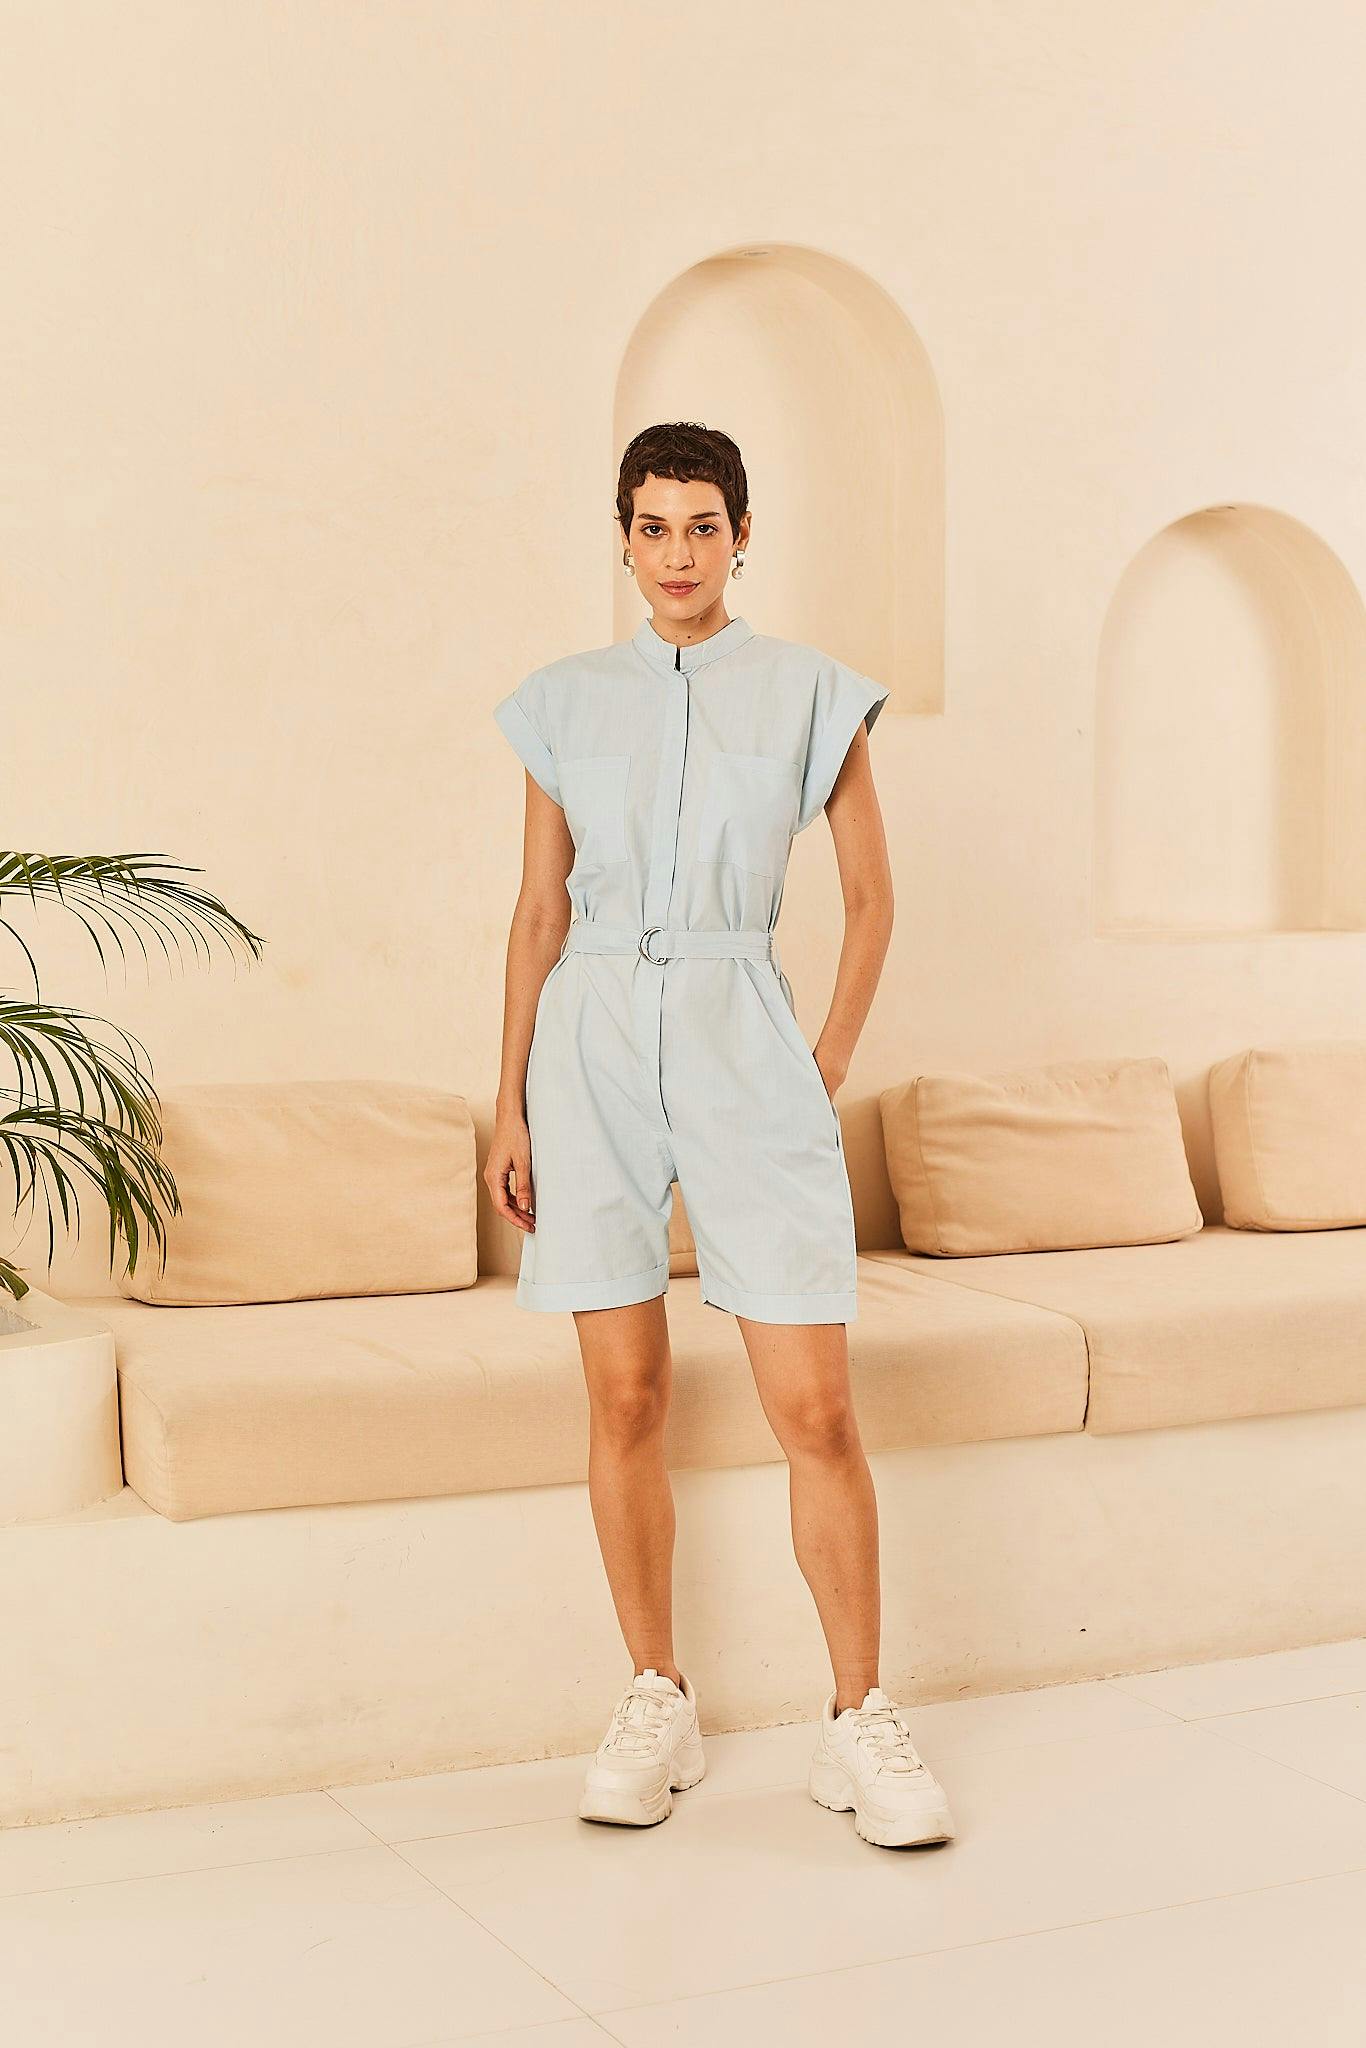 Charlotte's Chic Playsuit, a product by Sage By Mala